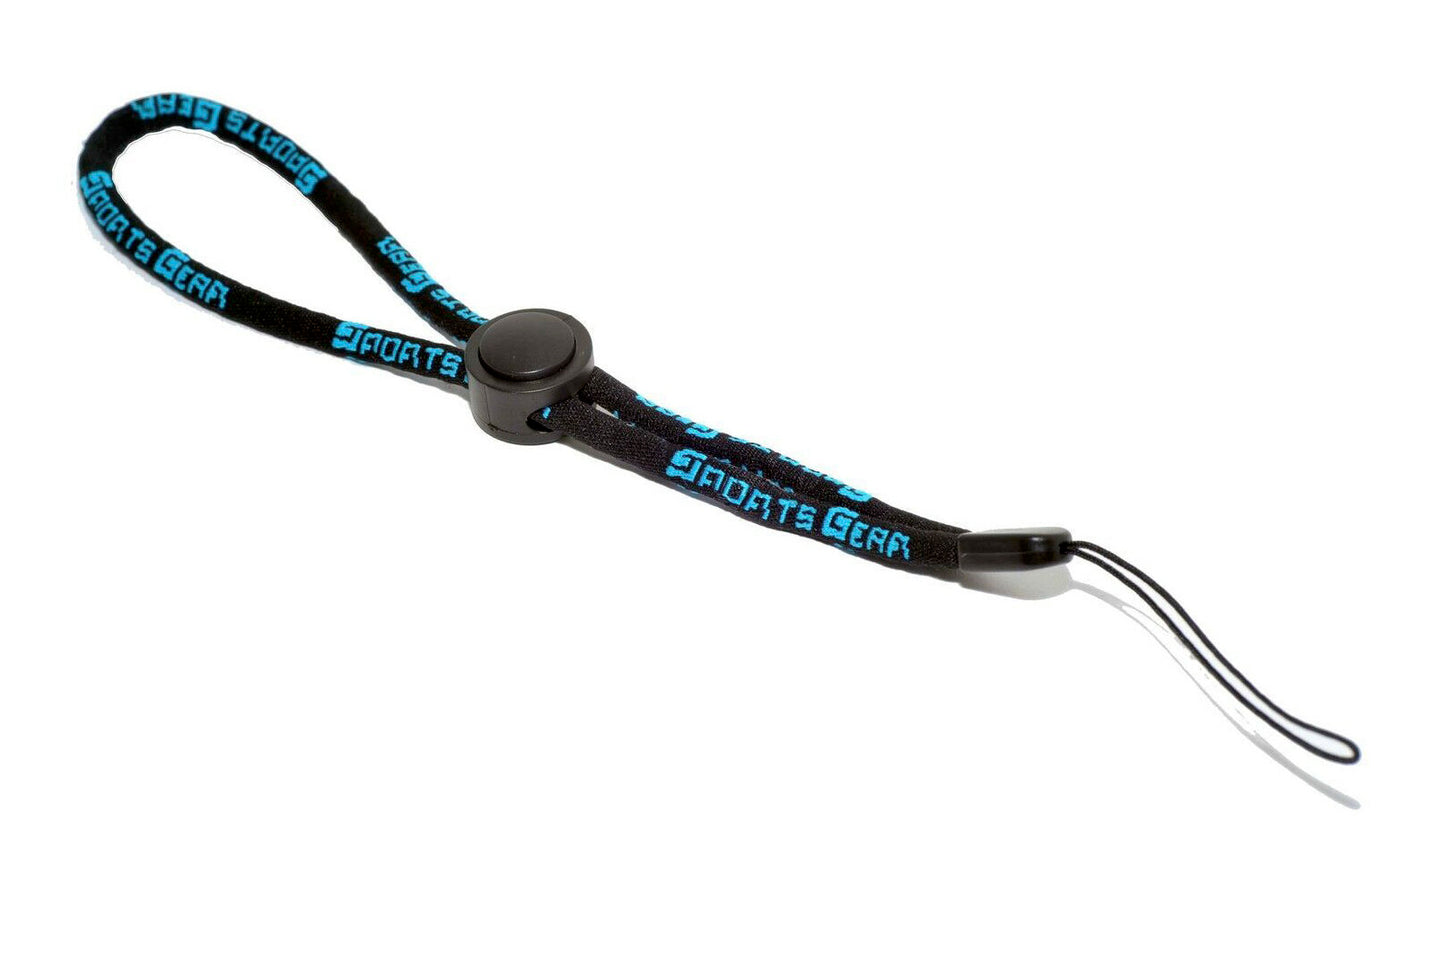 Fully adjustable Camera Wrist Strap for all Go Pro and Small Point and Shoot Cameras